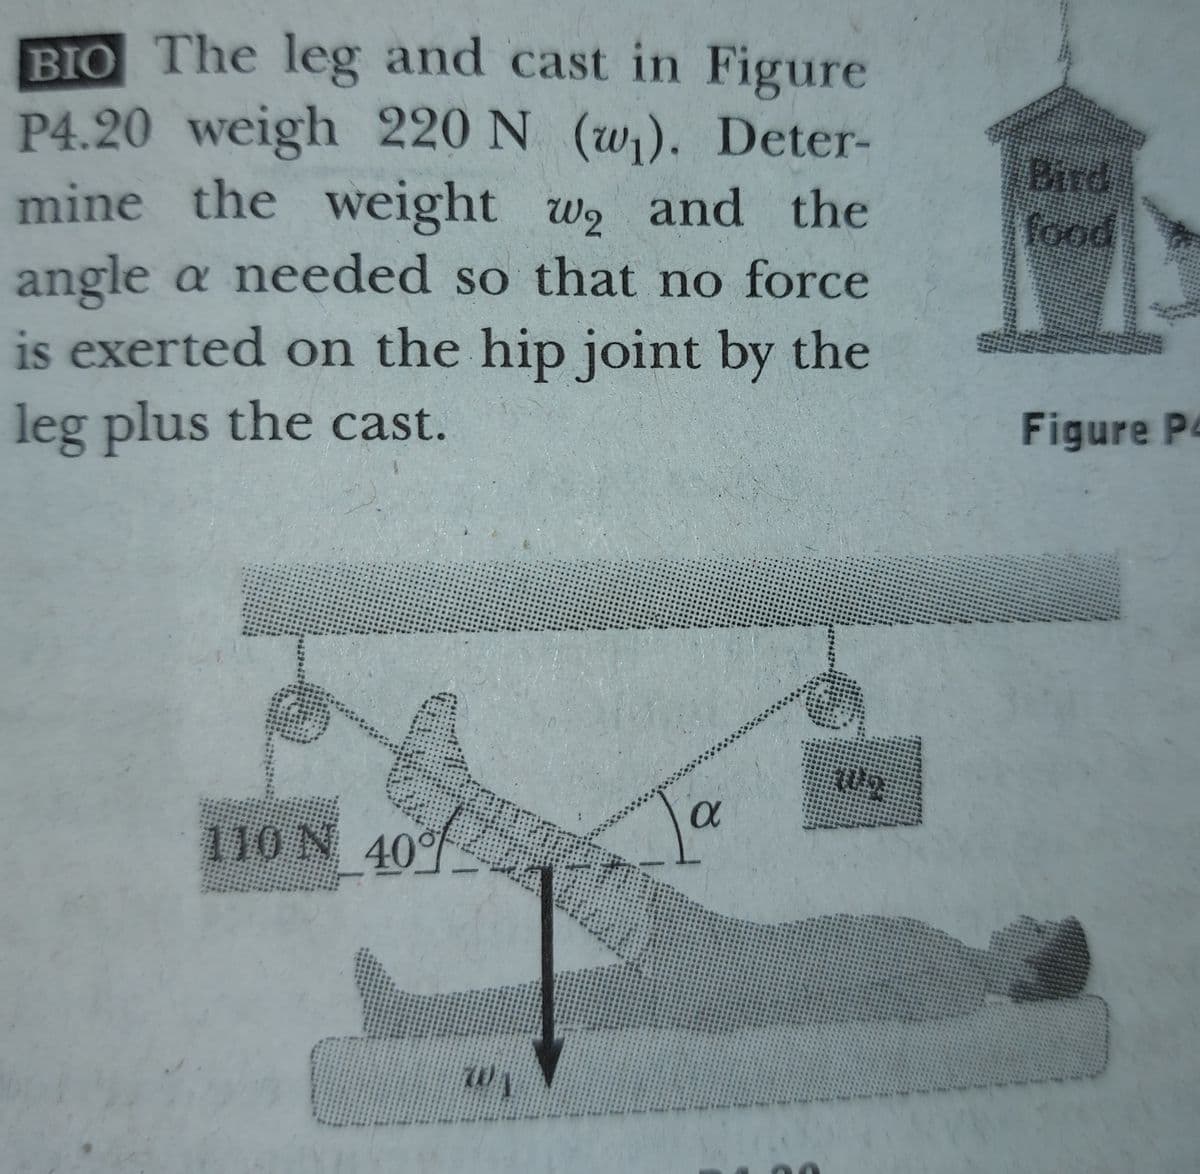 BIO The leg and cast in Figure
P4.20 weigh 220 N (w). Deter-
mine the weight w and the
angle a needed so that no force
is exerted on the hip joint by the
Bird
food
W2
leg plus the cast.
Figure P
110N 40
